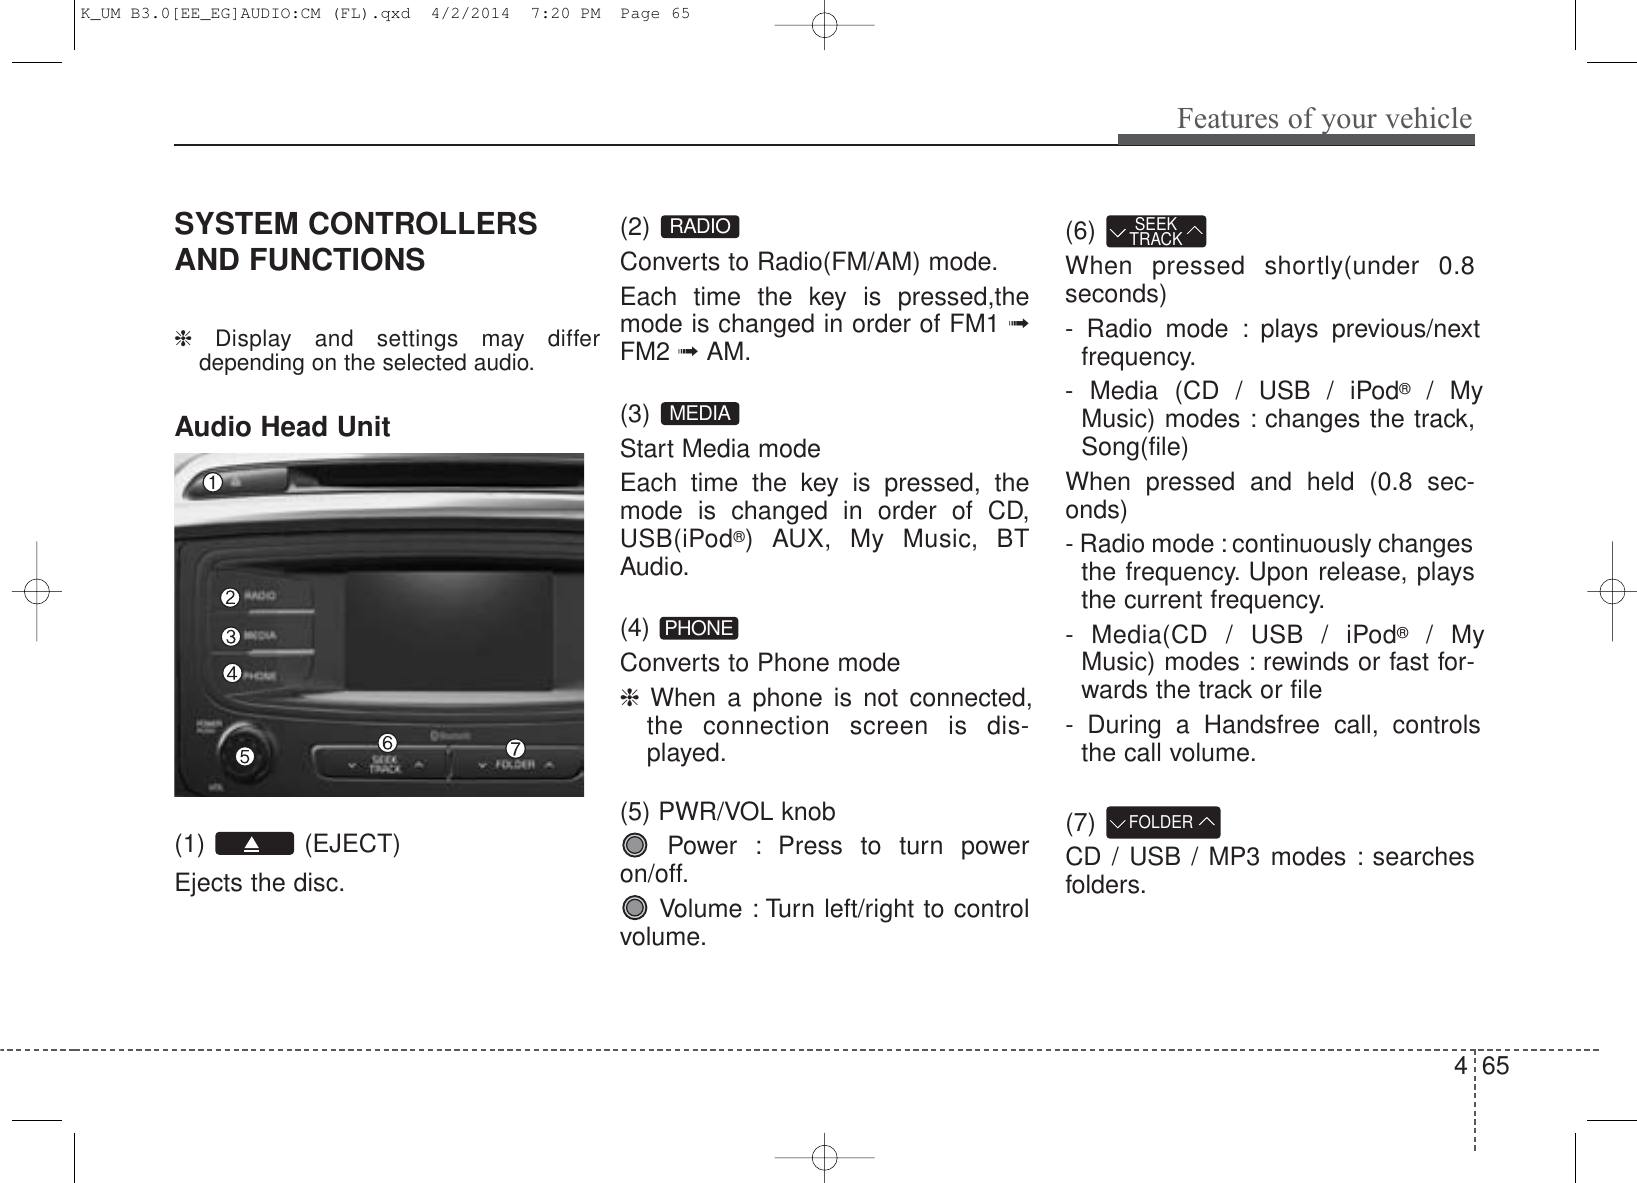 4 65Features of your vehicleSYSTEM CONTROLLERSAND FUNCTIONS❈  Display and settings may differdepending on the selected audio.Audio Head Unit (1) (EJECT)Ejects the disc.(2) Converts to Radio(FM/AM) mode.Each time the key is pressed,themode is changed in order of FM1 ➟FM2 ➟ AM.(3) Start Media modeEach time the key is pressed, themode is changed in order of CD,USB(iPod®) AUX, My Music, BTAudio.(4) Converts to Phone mode❈  When a phone is not connected,the connection screen is dis-played.(5) PWR/VOL knobPower : Press to turn poweron/off.Volume : Turn left/right to controlvolume.(6) When pressed shortly(under 0.8seconds)- Radio mode : plays previous/nextfrequency.- Media (CD / USB / iPod®/ MyMusic) modes : changes the track,Song(file)When pressed and held (0.8 sec-onds)- Radio mode : continuously changesthe frequency. Upon release, playsthe current frequency.- Media(CD / USB / iPod®/ MyMusic) modes : rewinds or fast for-wards the track or file- During a Handsfree call, controlsthe call volume.(7) CD / USB / MP3 modes : searchesfolders.FOLDERPHONESEEKTRACKMEDIARADIOK_UM B3.0[EE_EG]AUDIO:CM (FL).qxd  4/2/2014  7:20 PM  Page 65